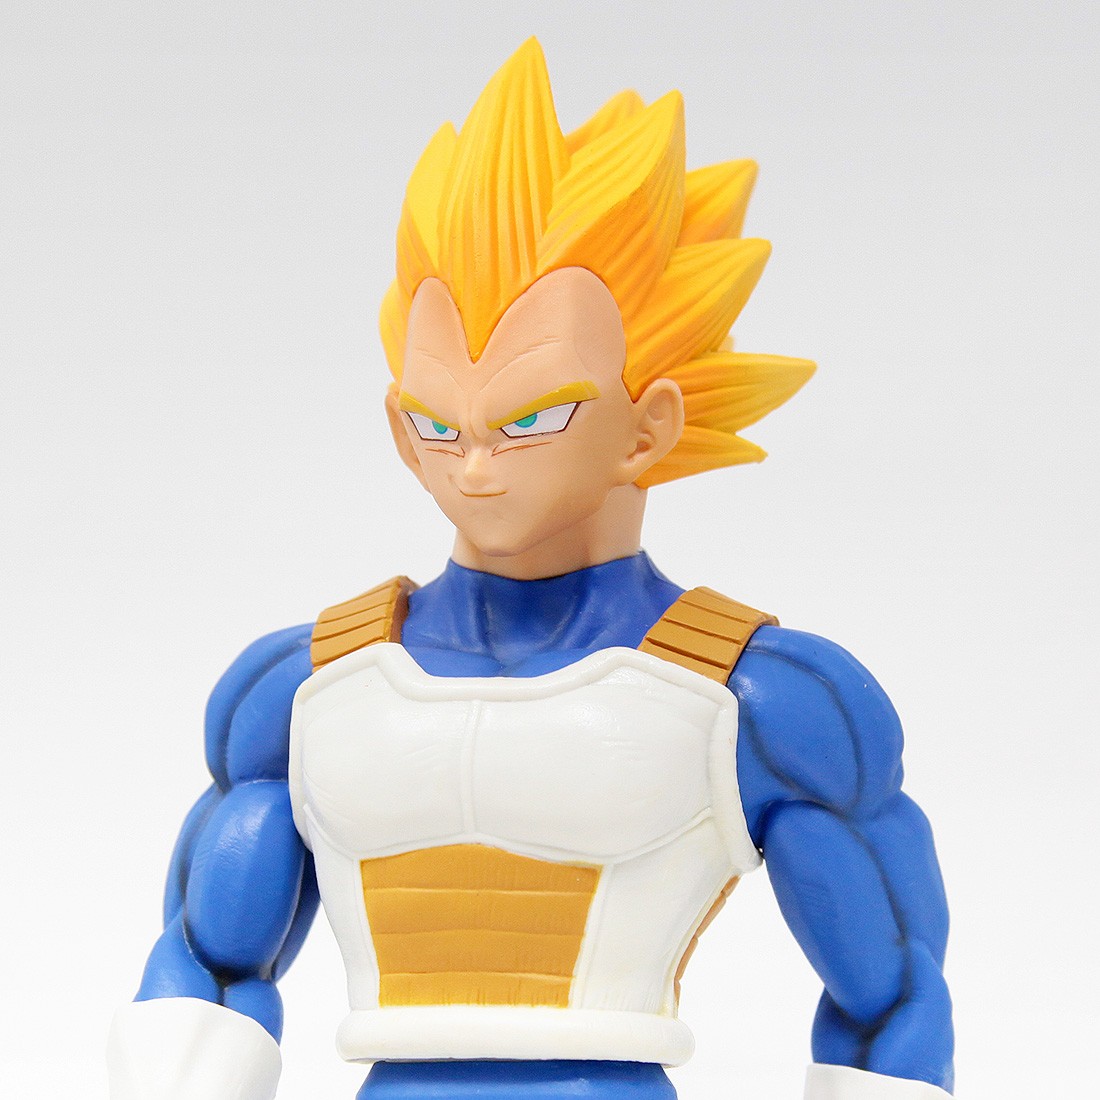 Banpresto Use spaces to separate tags. Use single quotes for phrases Solid  Edge Works Vol.3 Super Saiyan Vegeta Figure blue